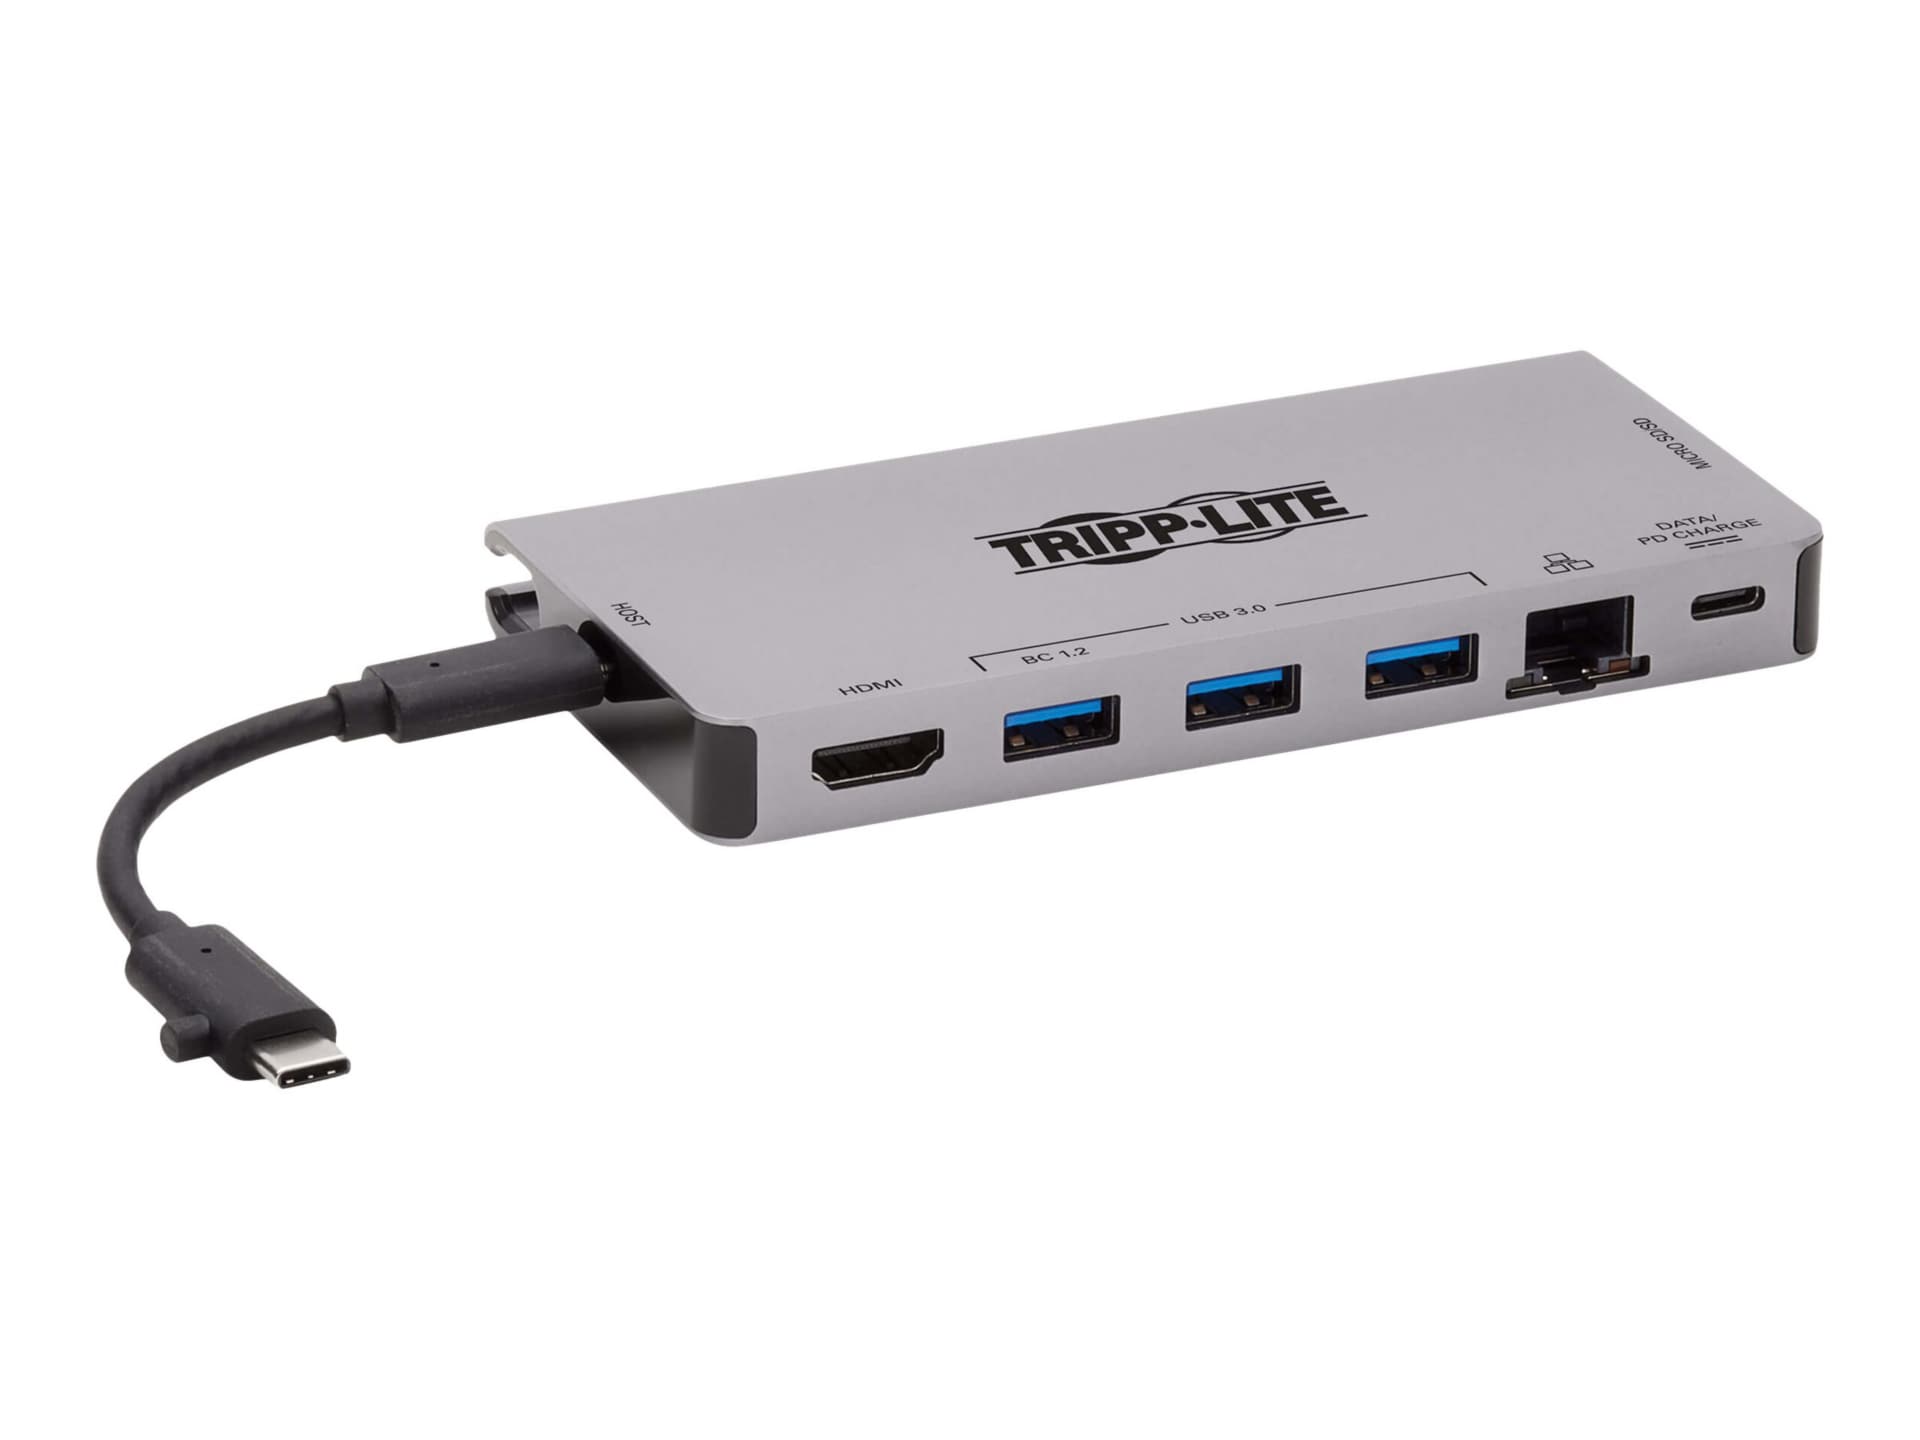 USB 3.0 Type-C 3-Port Hub with SD Card Reader Combo